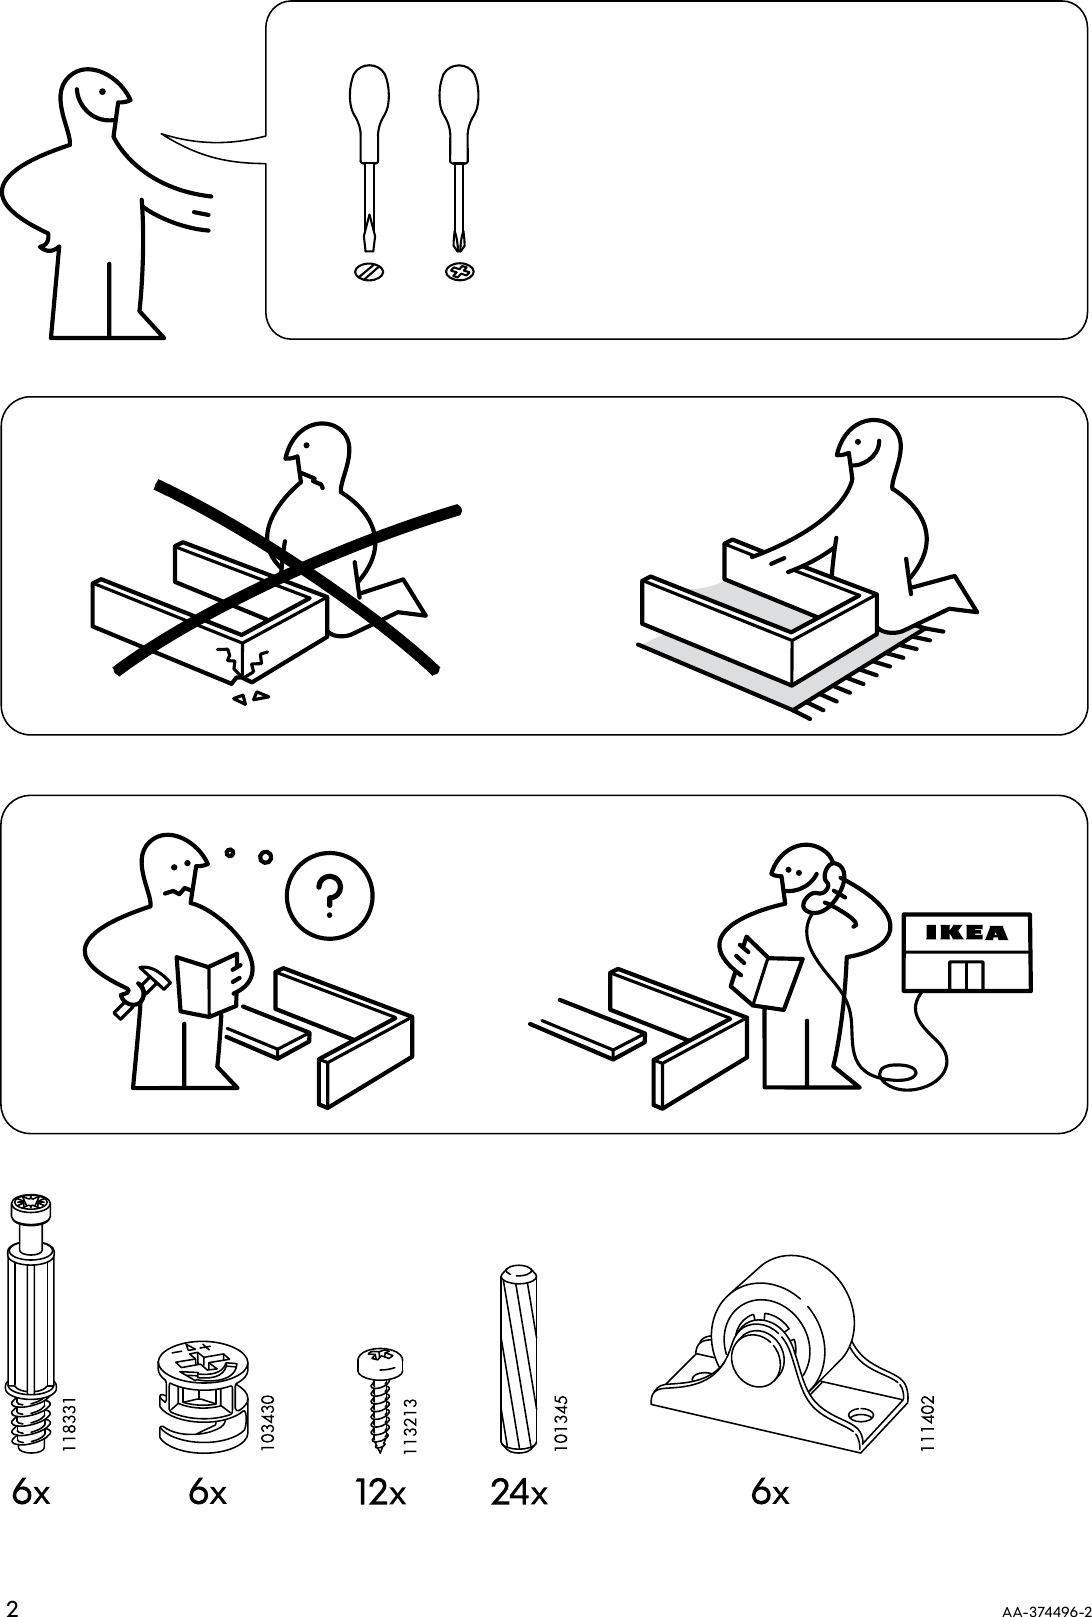 Page 2 of 8 - Ikea Ikea-Engan-Bed-Storage-Box-Assembly-Instruction